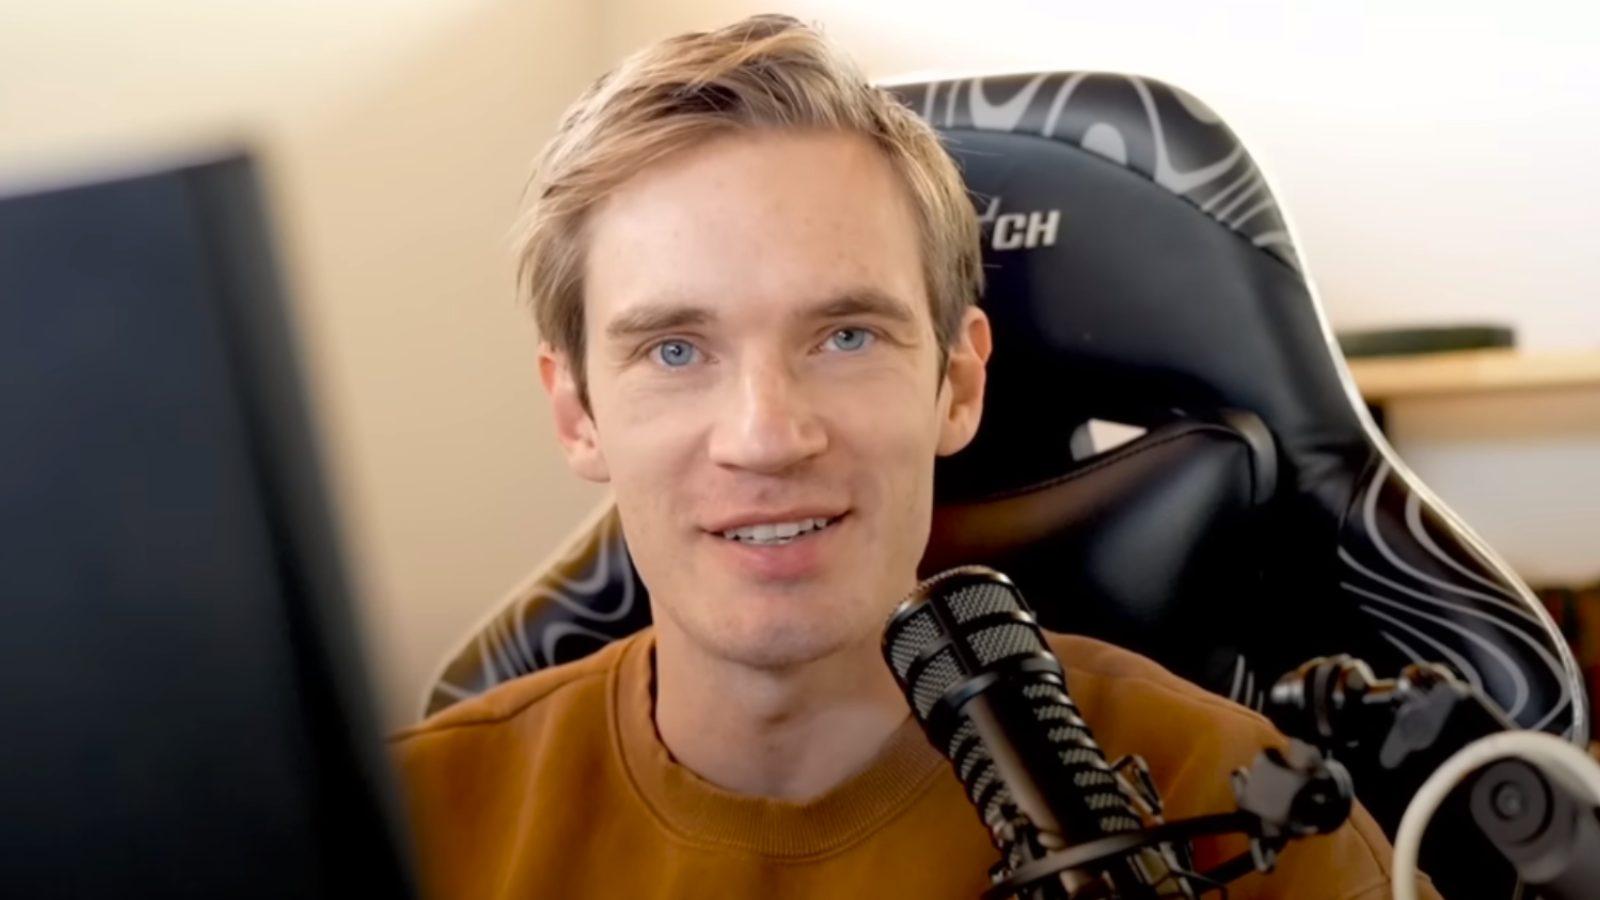 PewDiePie speaking to the camera as part of a YouTube video.